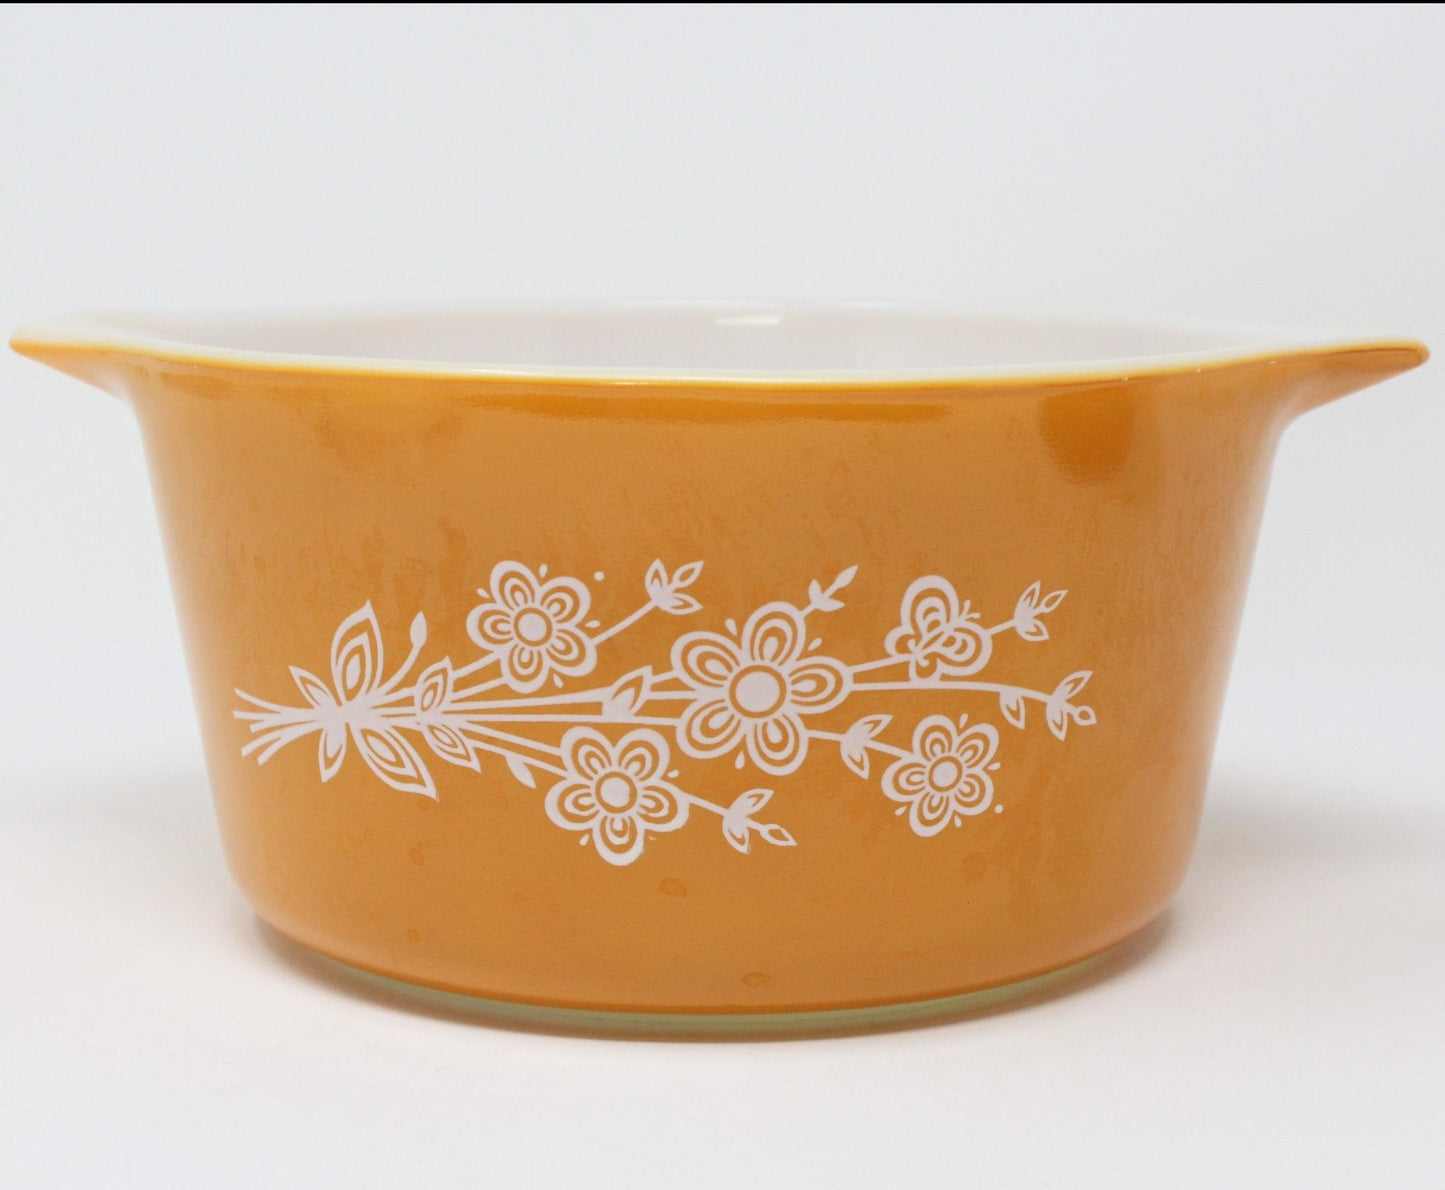 Casserole w/Lid, Pyrex Cinderella, Butterfly Gold & Woodland Leaves, Vintage